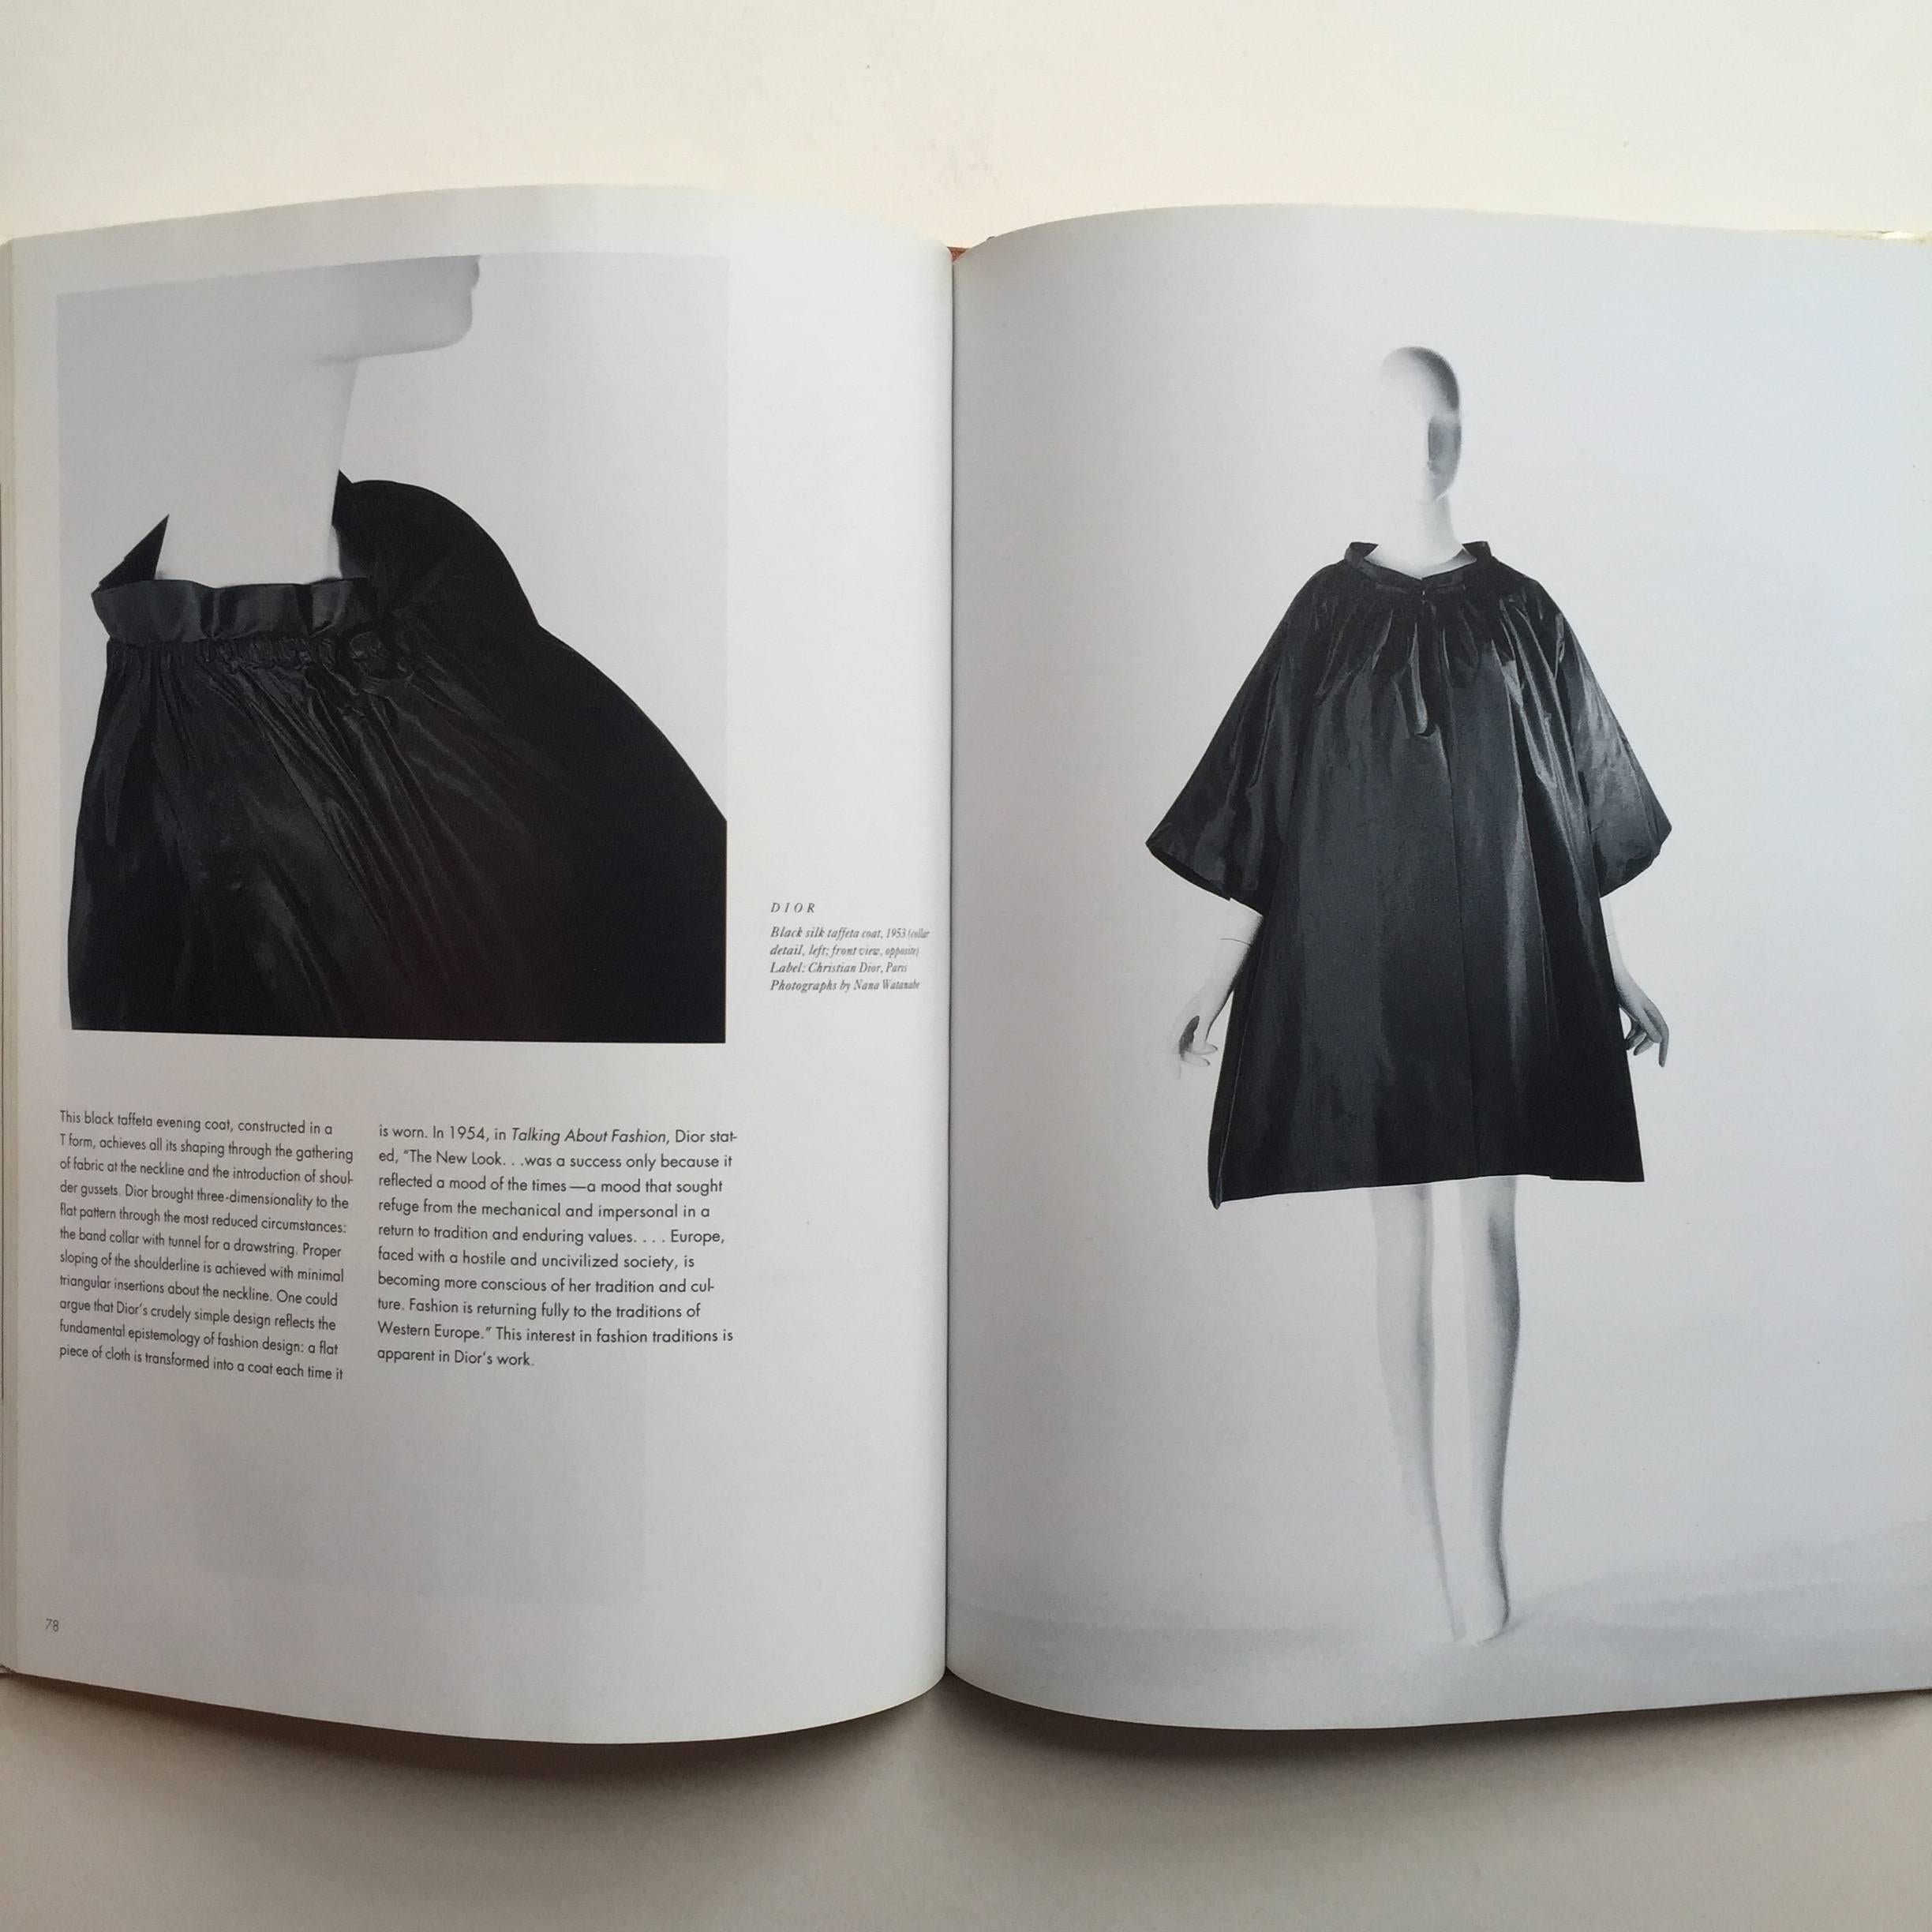 First edition, published by Rizzoli & Fashion Institute of Technology, 1992 

Flair: Fashion Collected by Tina Chow was published to coincide with the exhibition of the same name held at the Fashion Institute of Technology, New York.